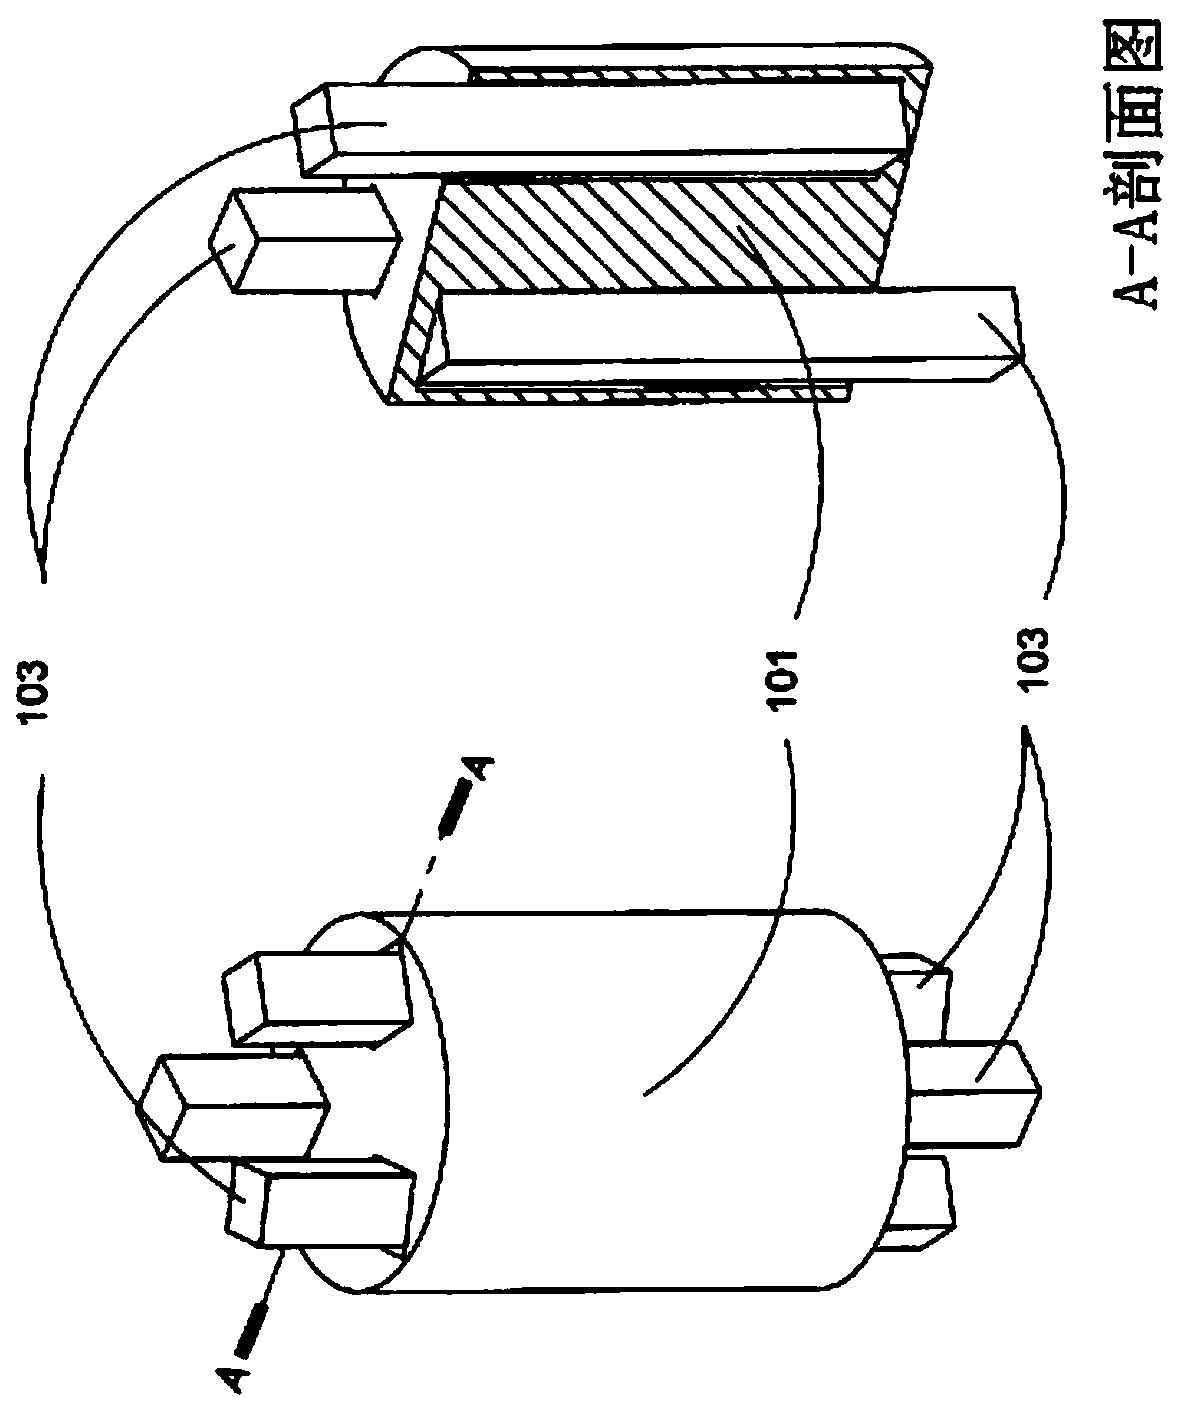 Cost-effective high-bending-stiffness connector and piezoelectric actuator made of such